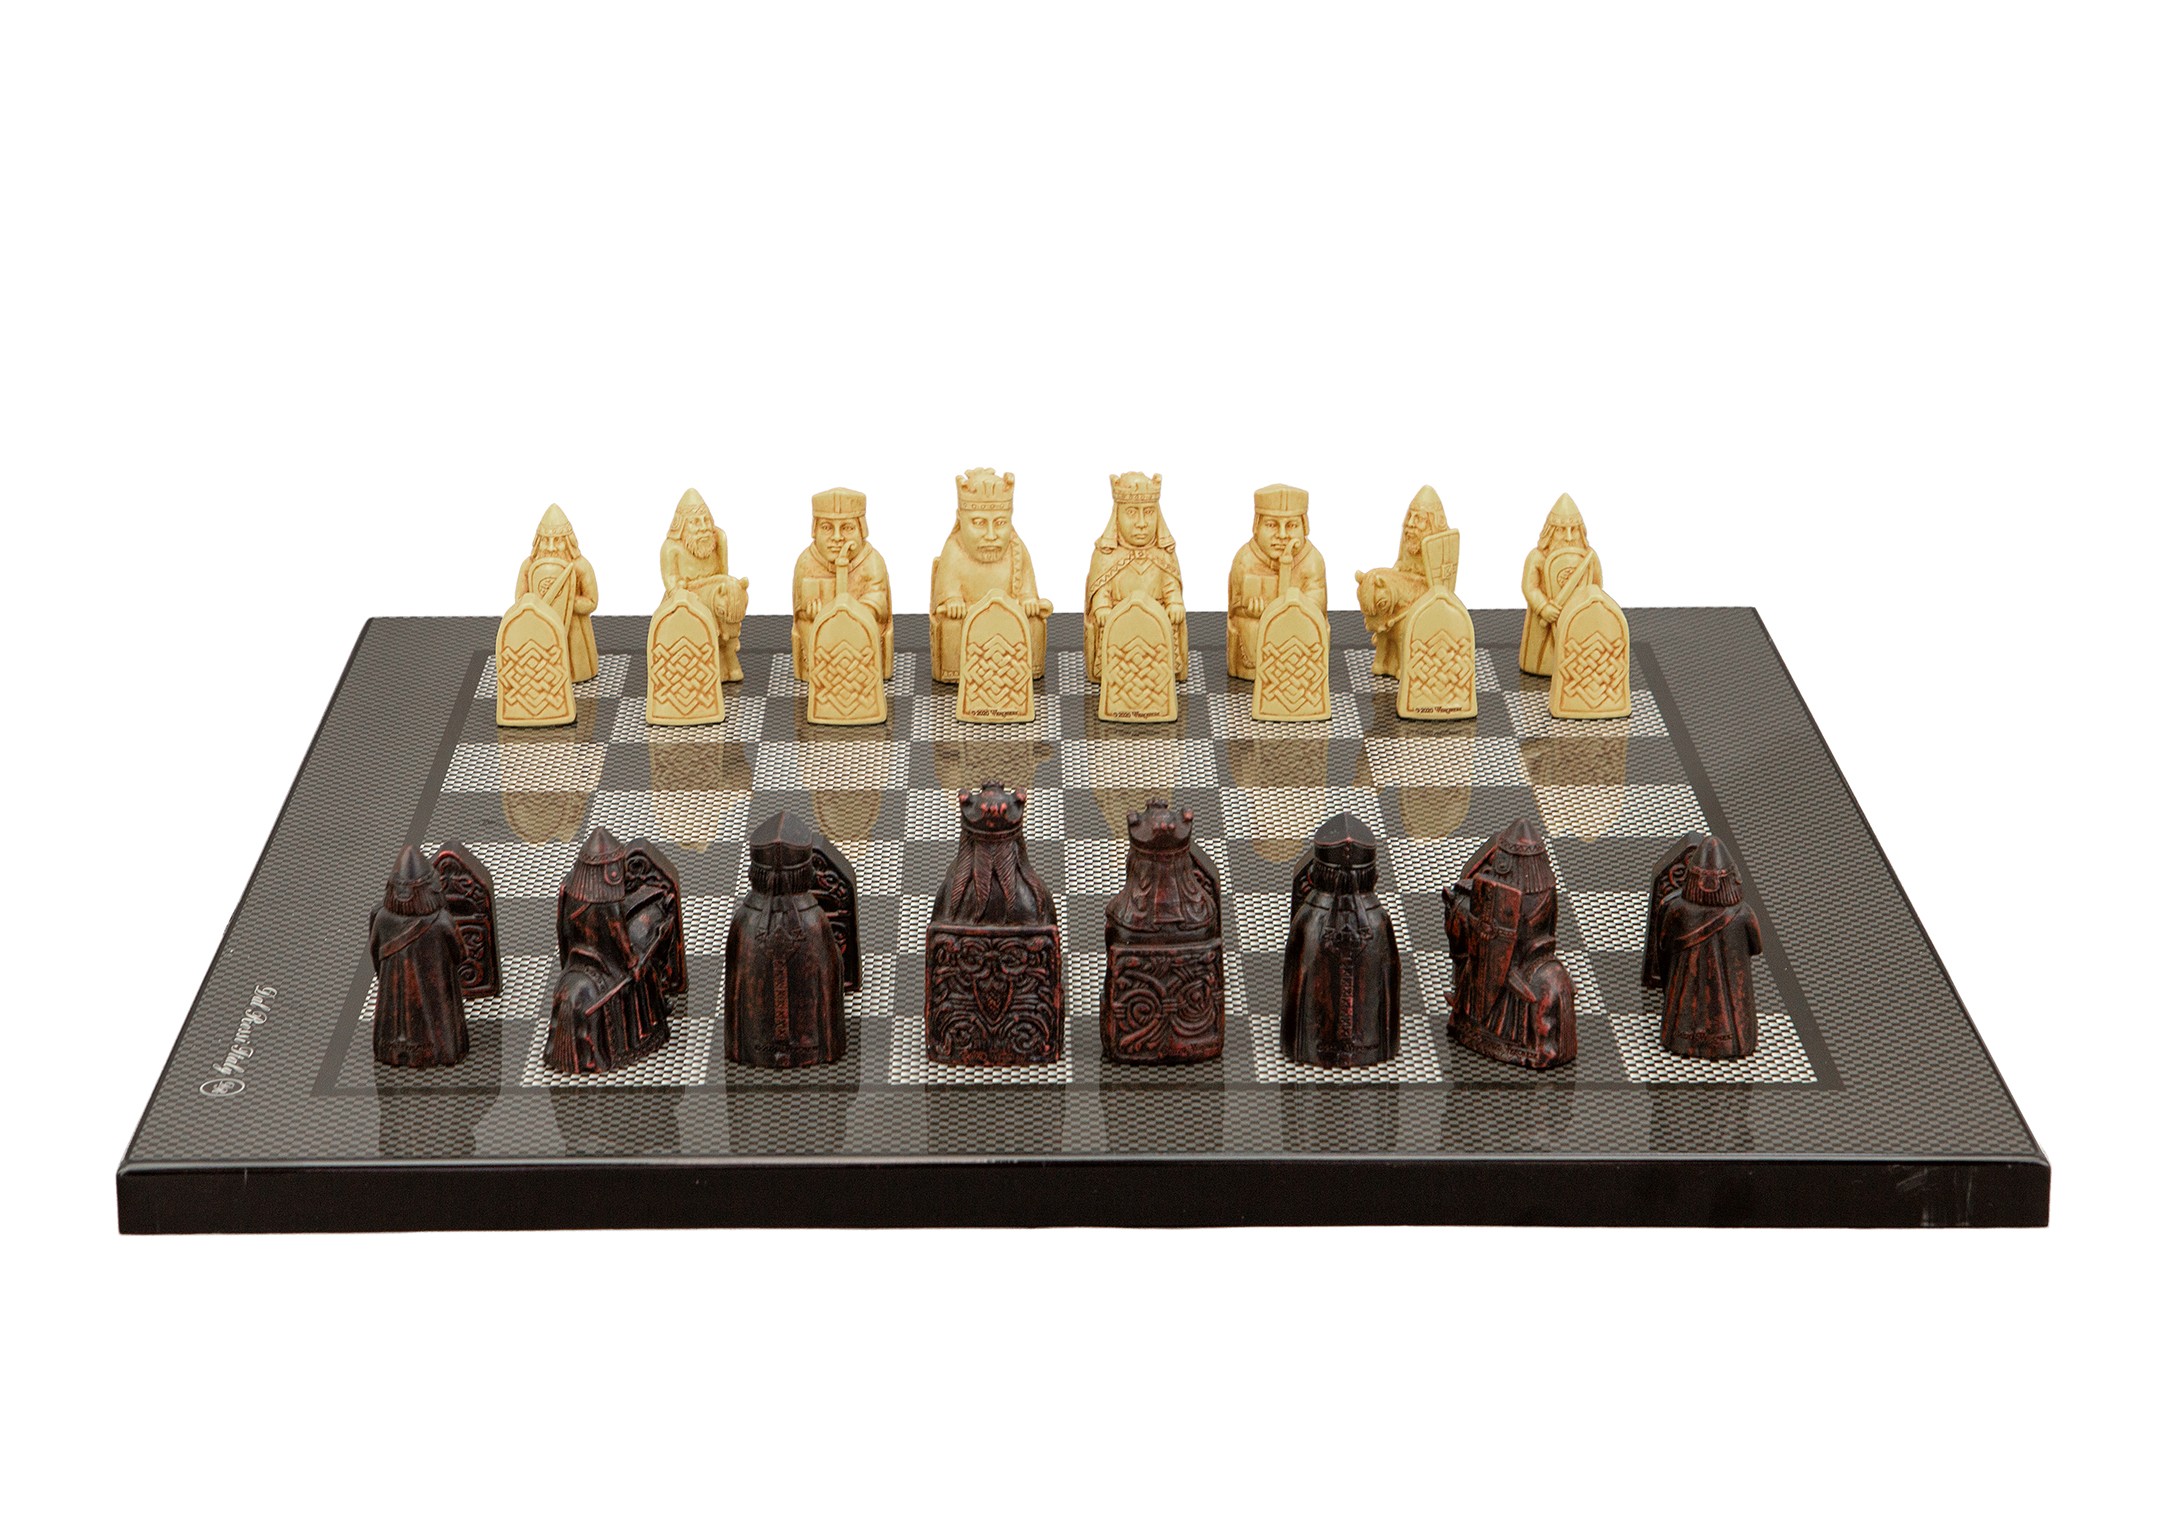 Dal Rossi Italy Isle of Lewis Chess Set on a Carbon Fibre Shiny Finish Chess Board 40cm